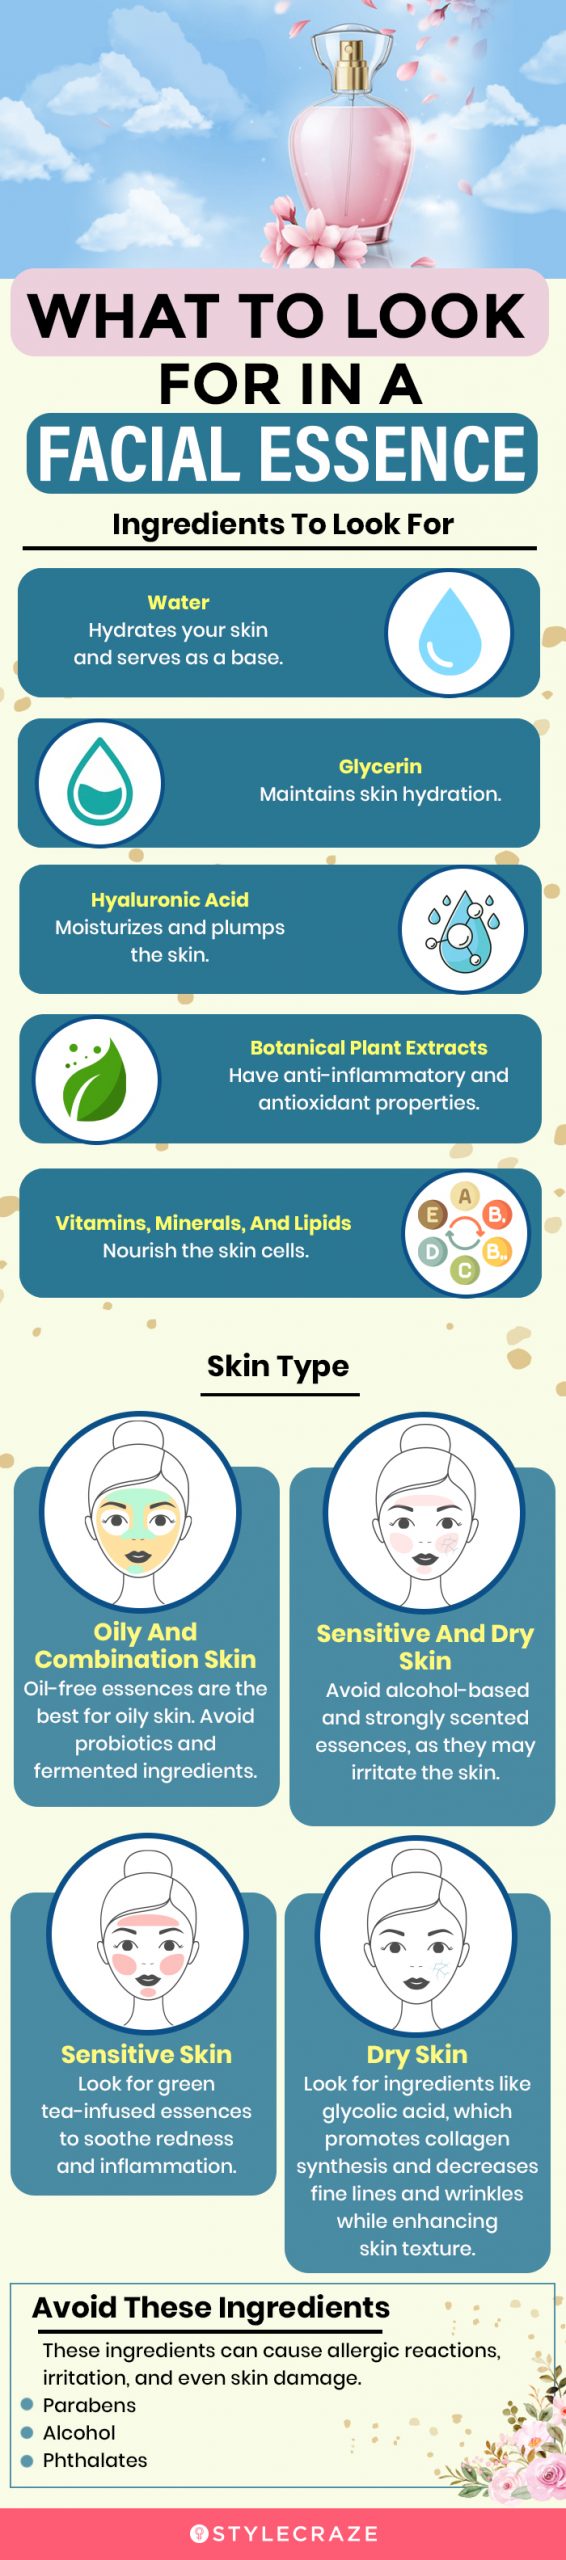 What To Look For In A Facial Essence  [infographic]